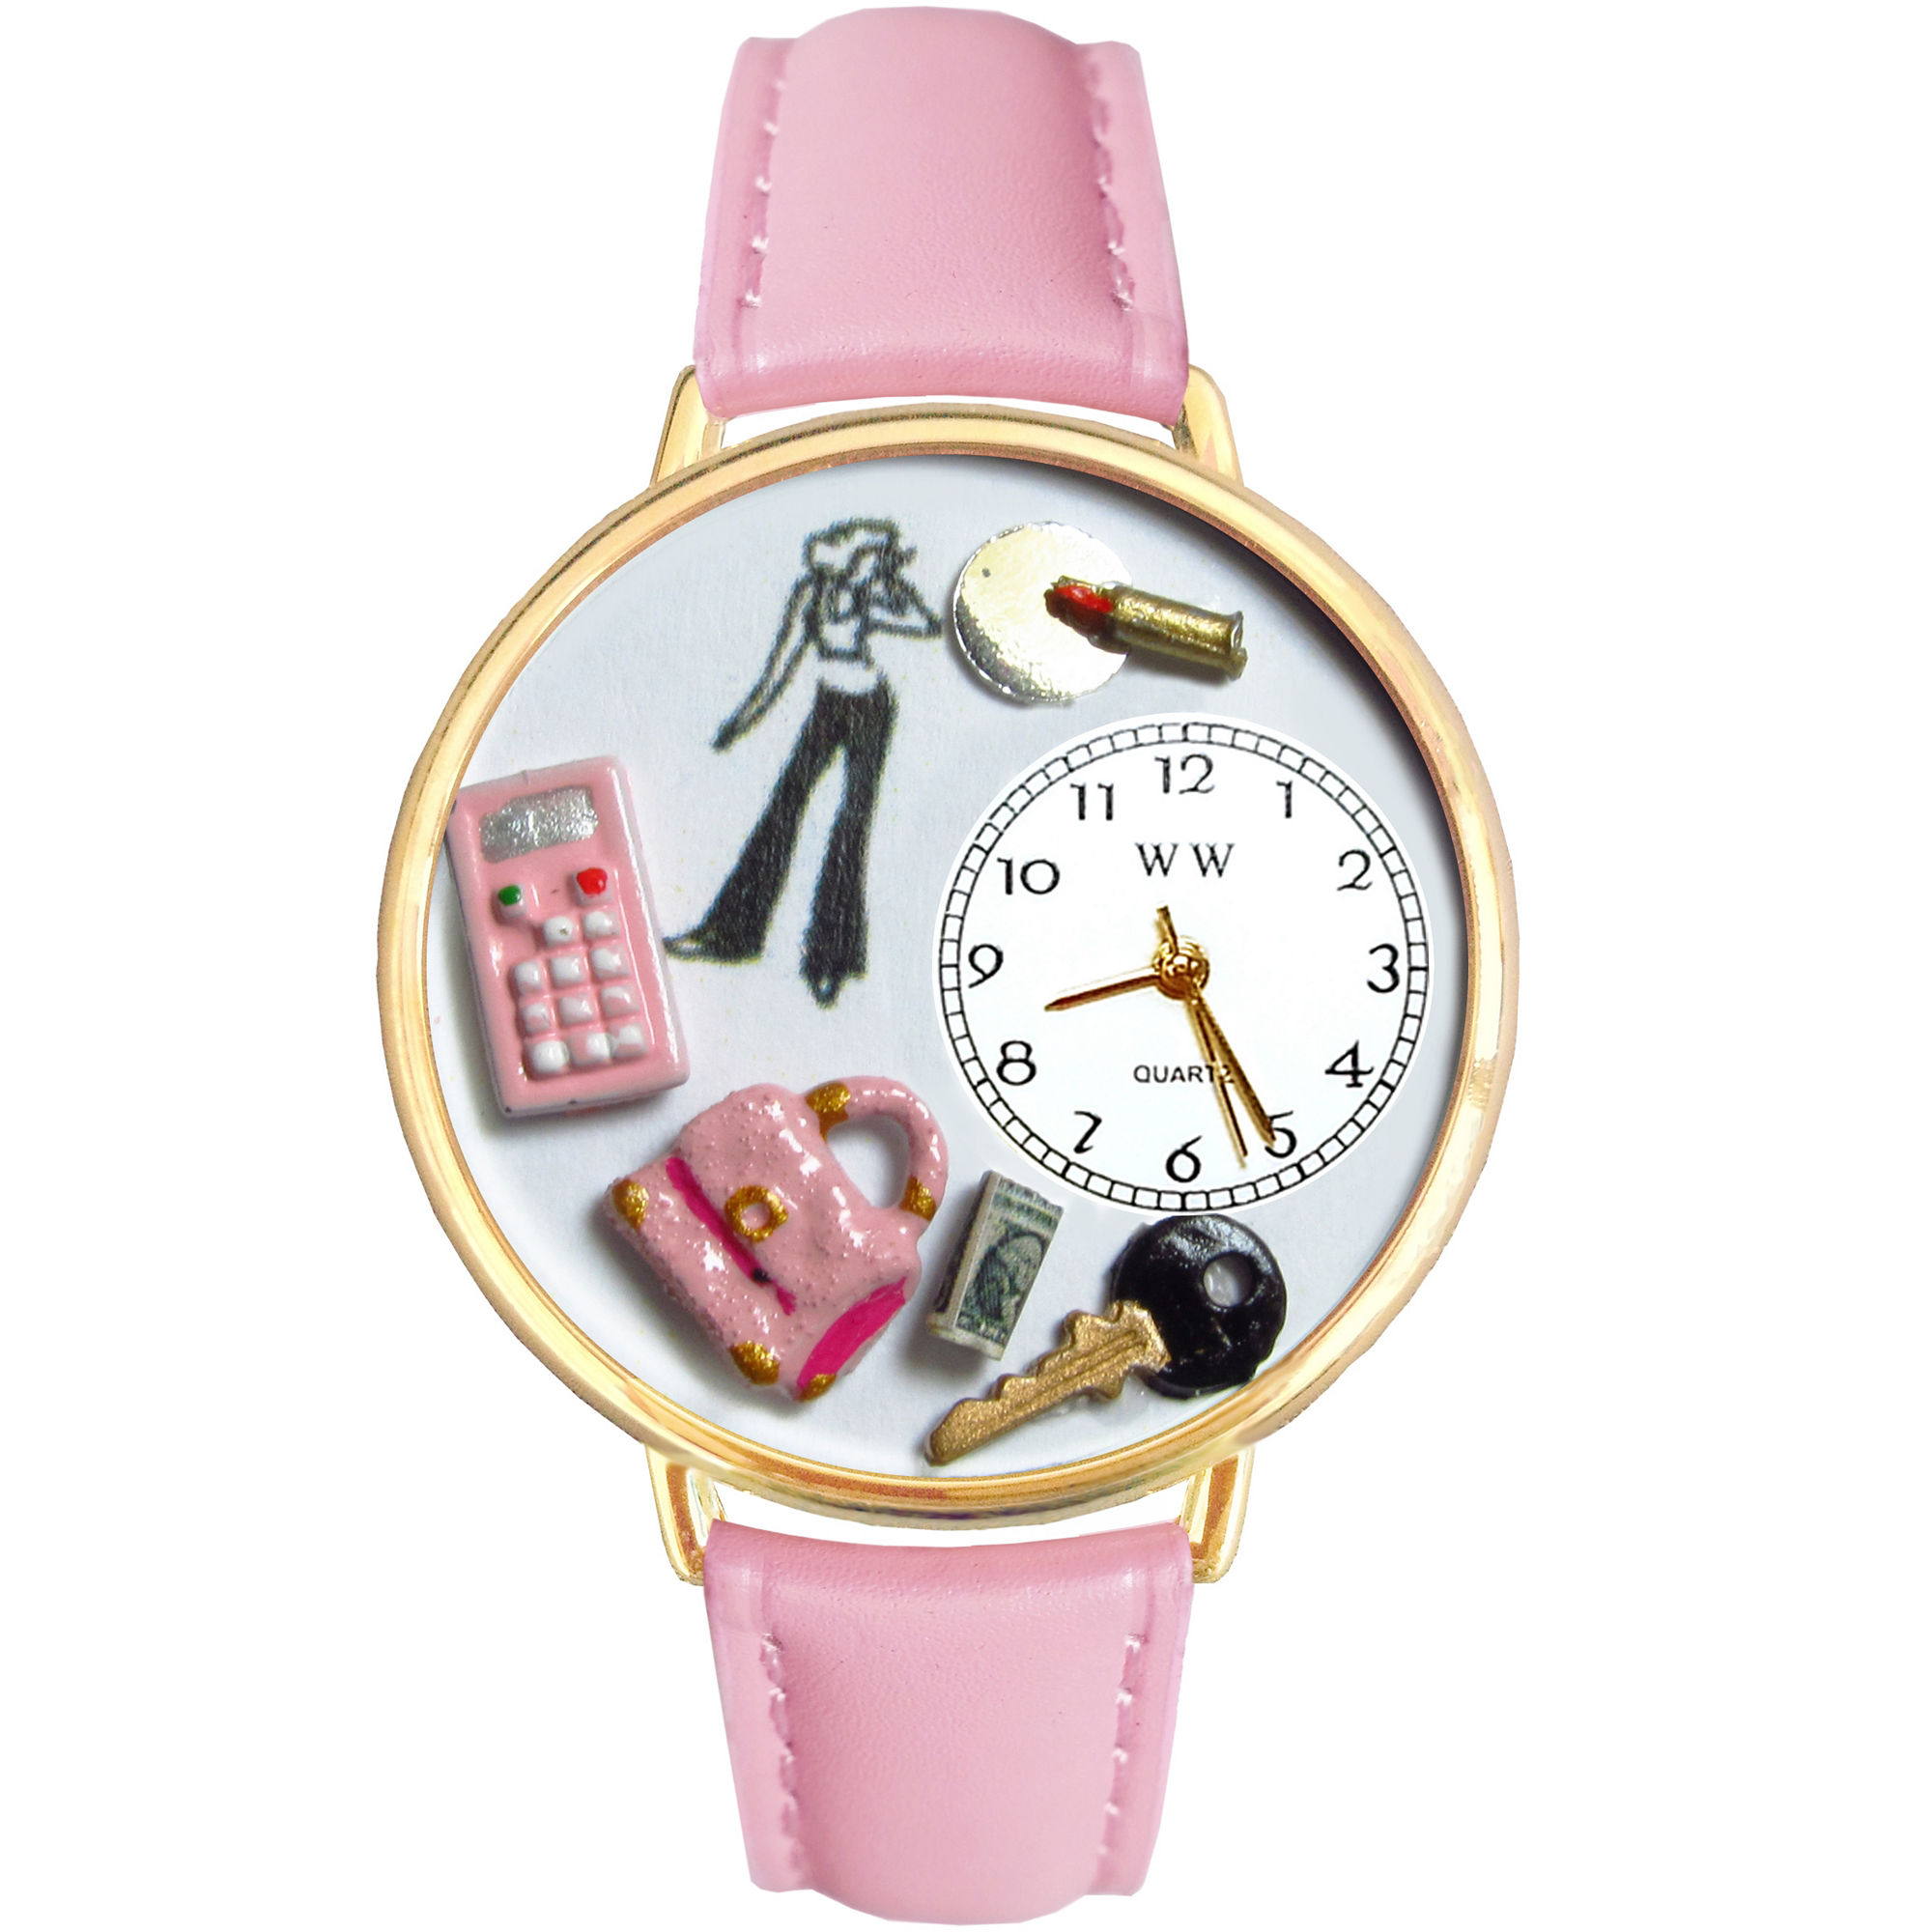 Whimsical Watches Personalized Teen Girl Womens Gold-Tone Bezel Pink Leather Strap Watch